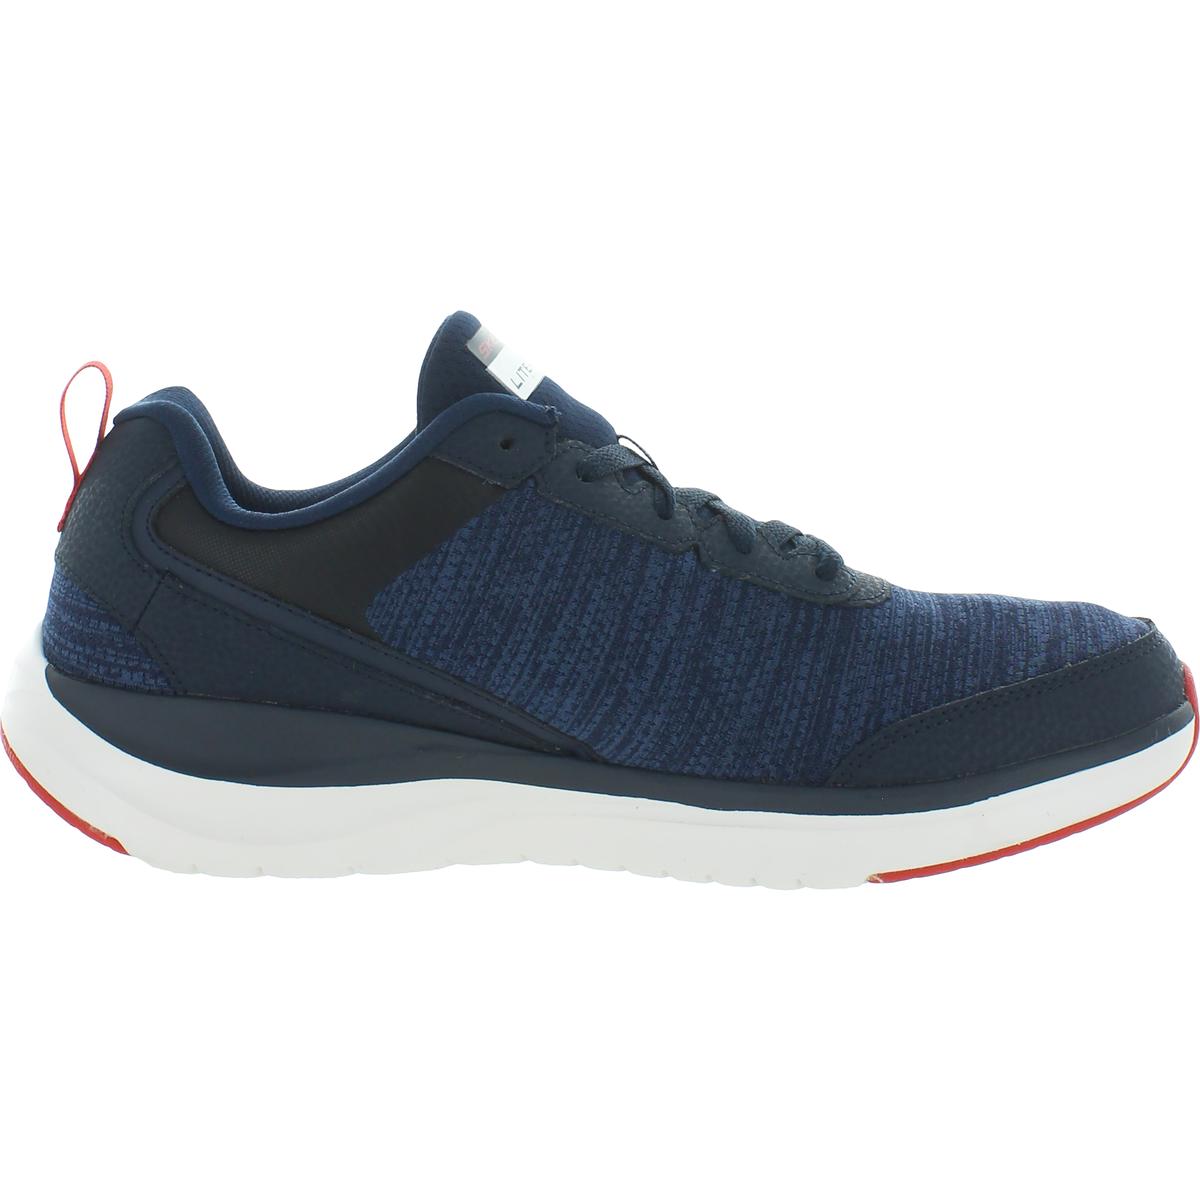 Skechers Mens Ultra Groove Light Weight Athletic Shoes Sneakers BHFO ...